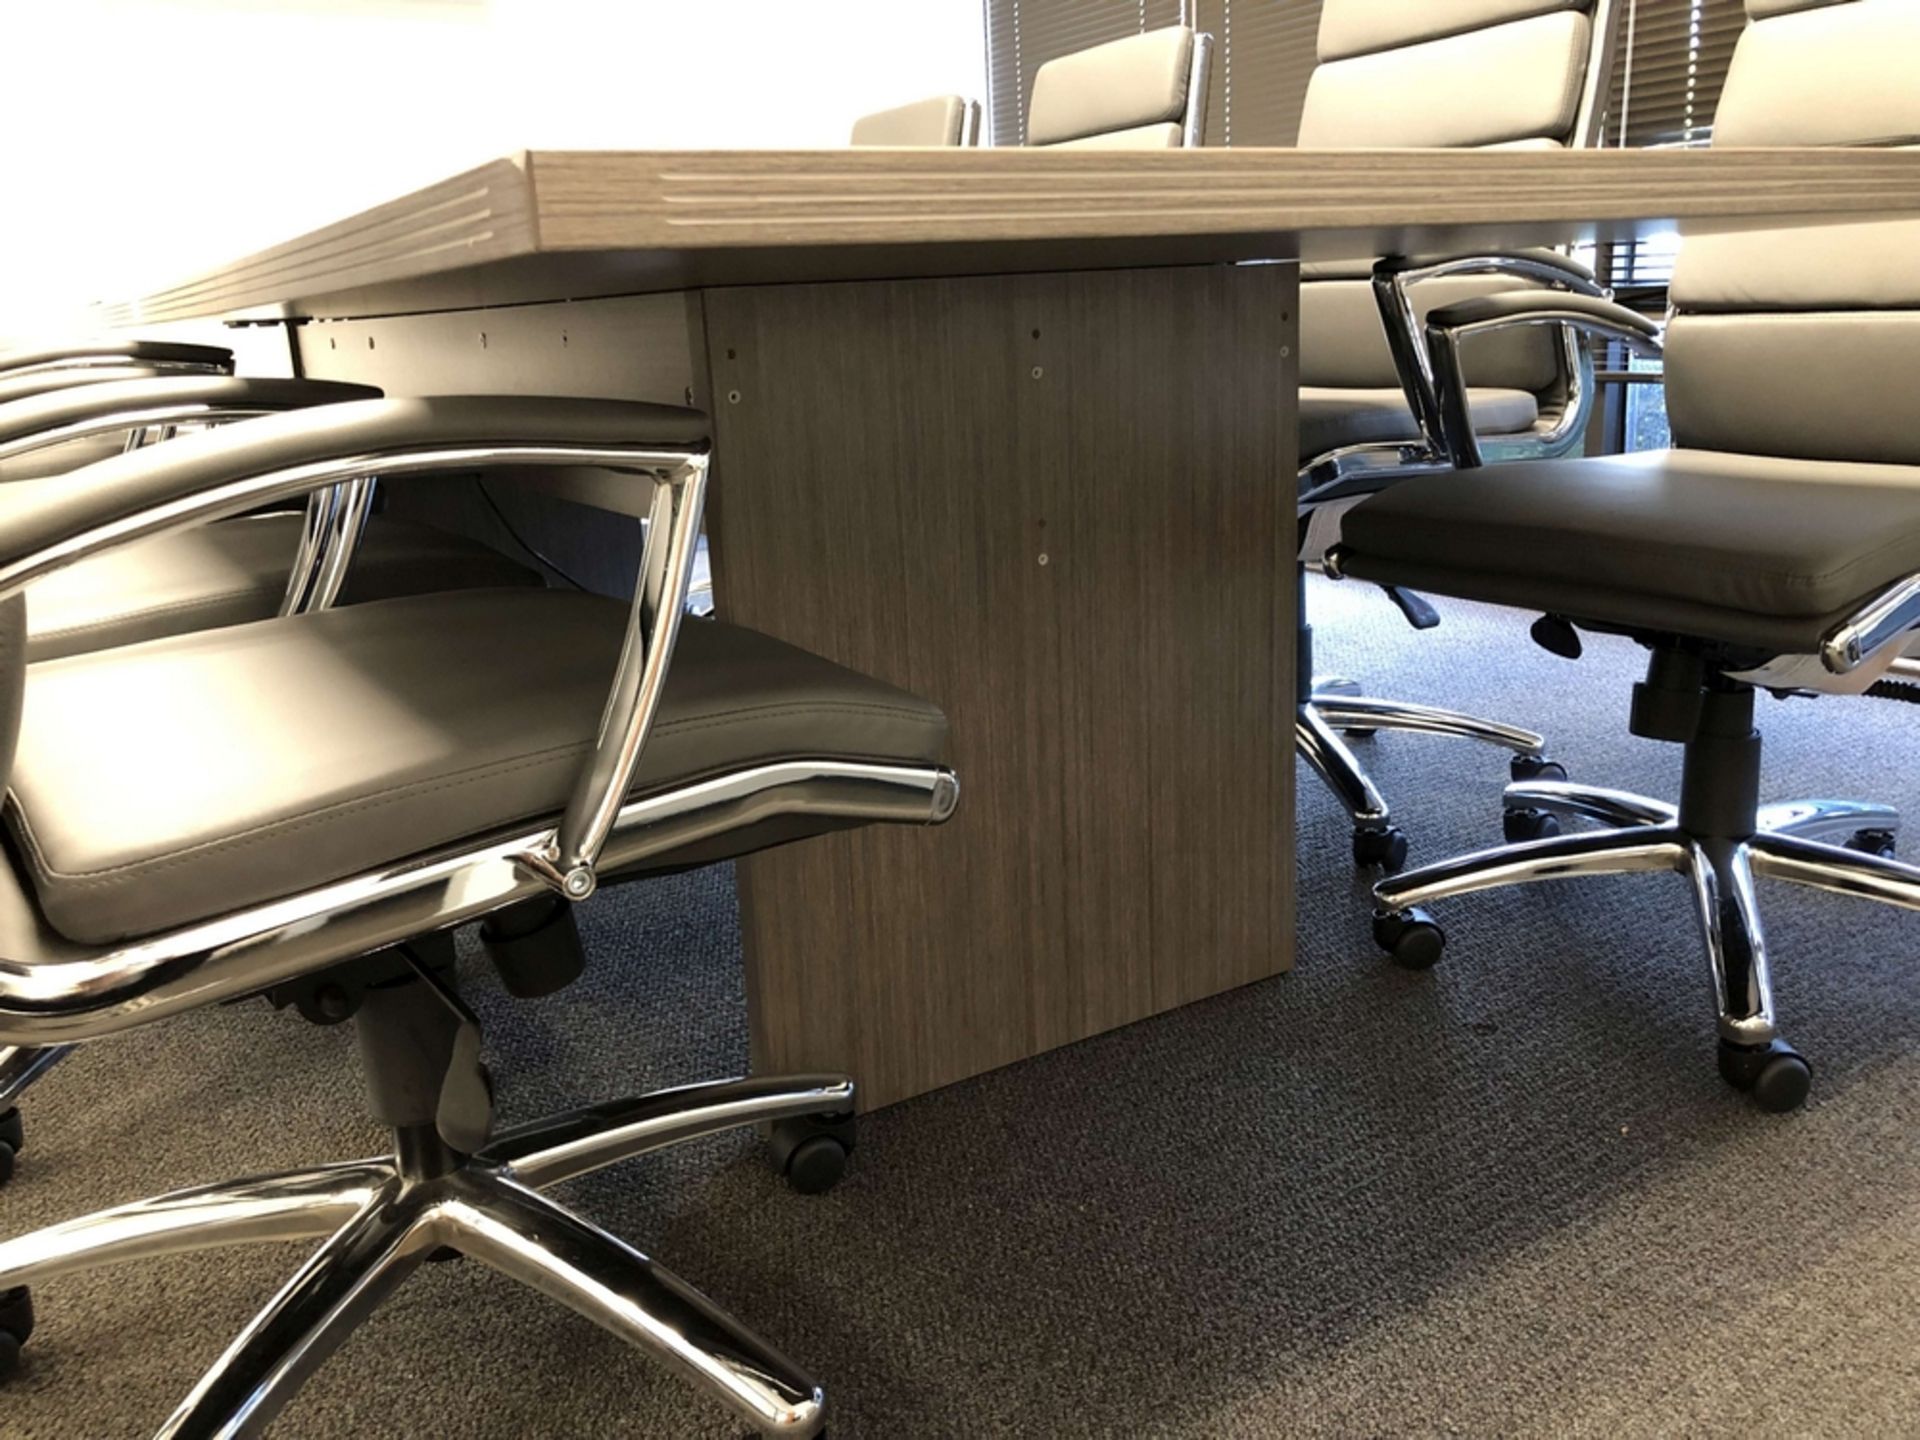 Conference Table (10' L x 47-1/4" W x 30"H), (8) Boss CaressoftPlus High-Back Executive Office - Image 3 of 5